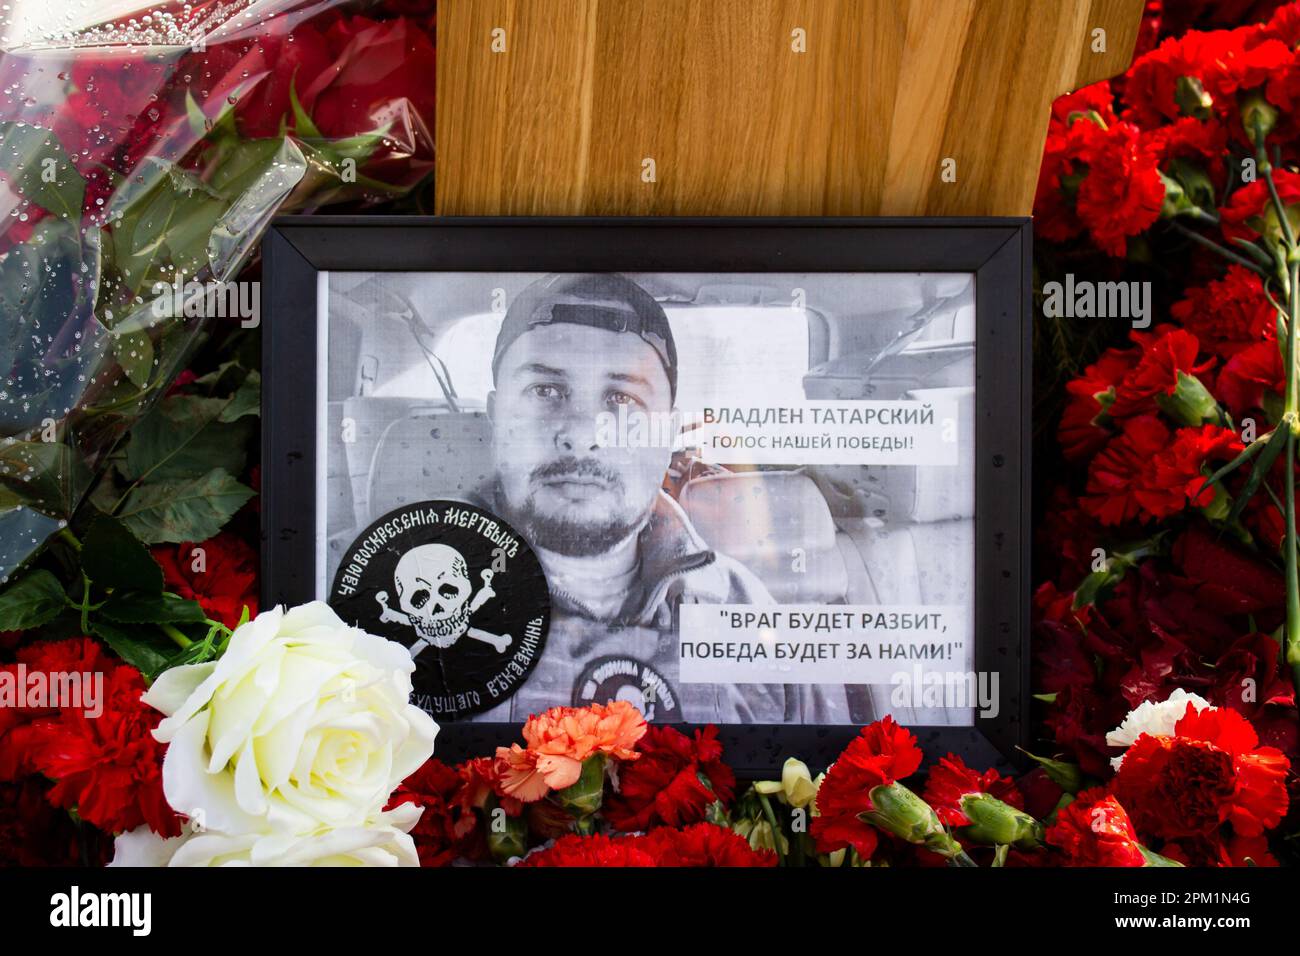 A framed photo of Vladlen Tatarsky at his grave at Troyekurovskoye cemetery in Moscow. Maxim Fomin better known by his pen-name Vladlen Tatarsky was a convicted criminal who escaped from prison and made a name for himself as a Ukrainian-born Russian military blogger and a participant in the war between Russian and Ukraine. He was active as a propagandist for the Russian side in the war until he was murdered in a terrorist act in St. Petersburg on April 2, 2023. 26-year-old woman named Darya Trepova was arrested for the bombing that had killed Tatarsky and injured dozens of others. (Photo by Vl Stock Photo